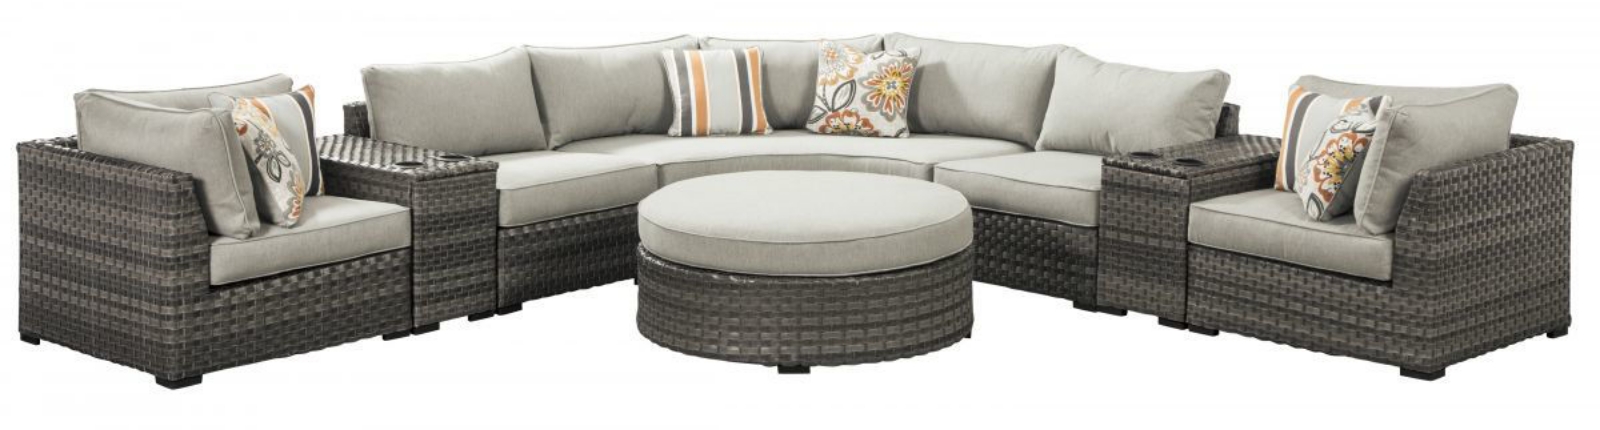 Picture of Spring Dew Patio Sectional with Ottoman